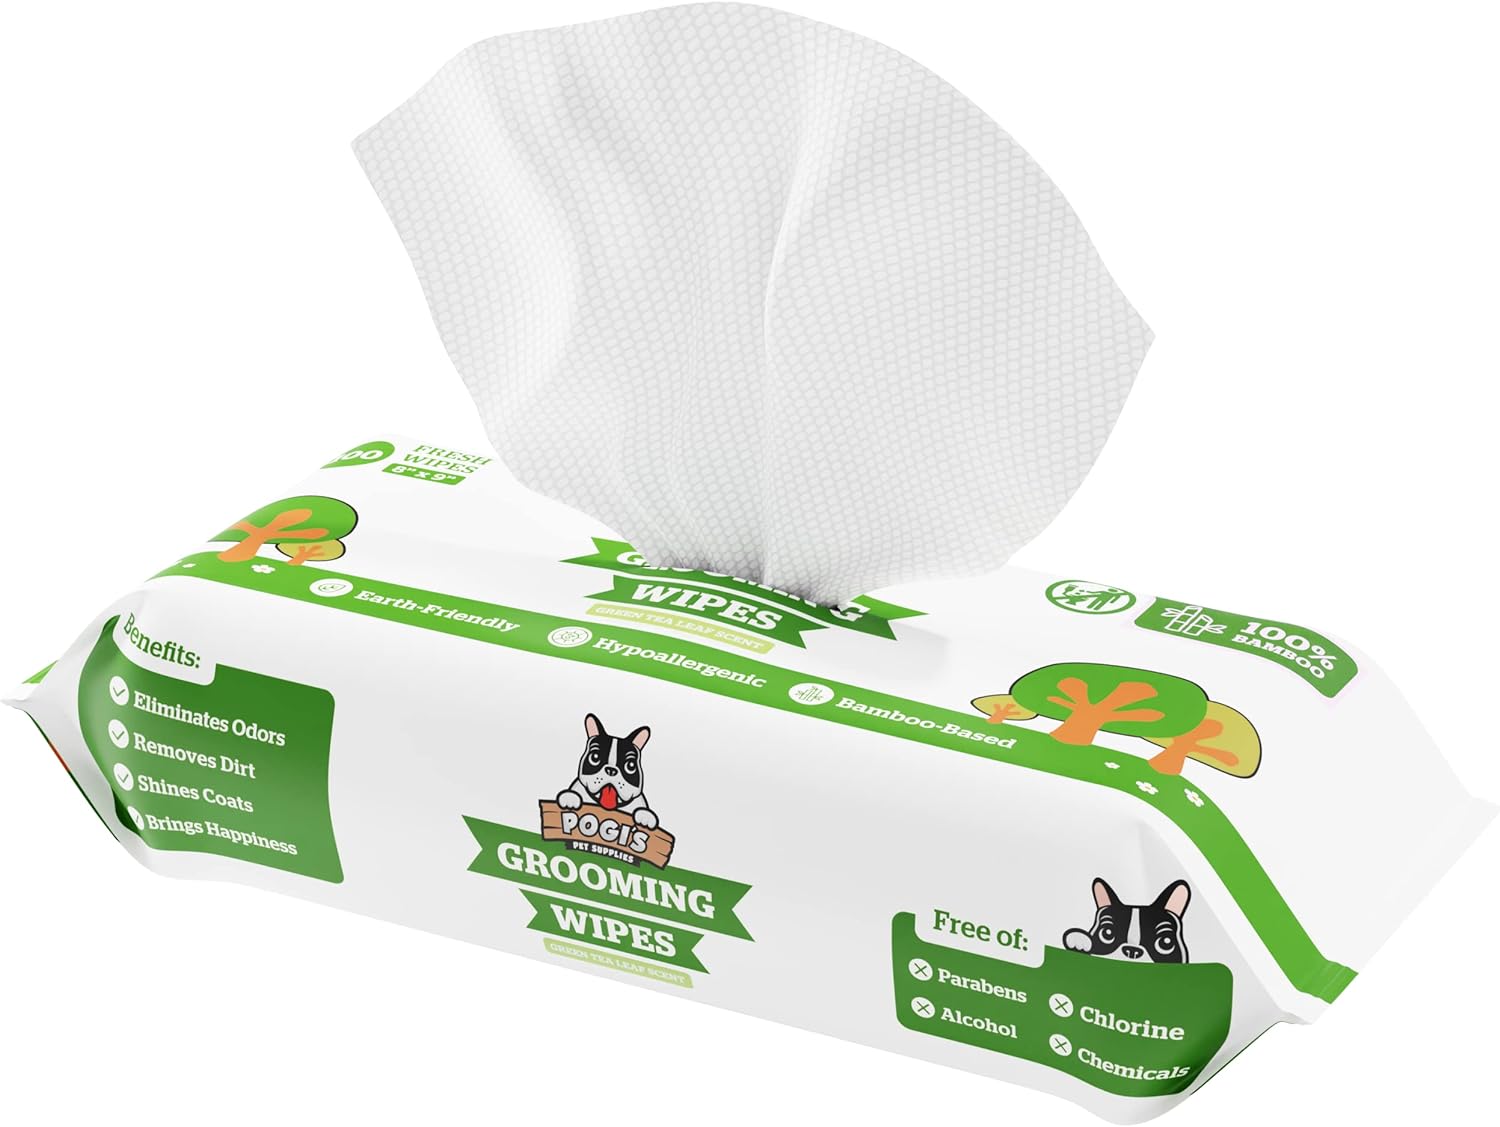 Pogi's Dog Grooming Wipes - 100 Dog Wipes for Cleaning and Deodorizing - Plant-Based, Hypoallergenic Pet Wipes for Dogs, Puppy Wipes - Quick Bath Dog Wipes for Paws, Butt, & Body - Green Tea Scented